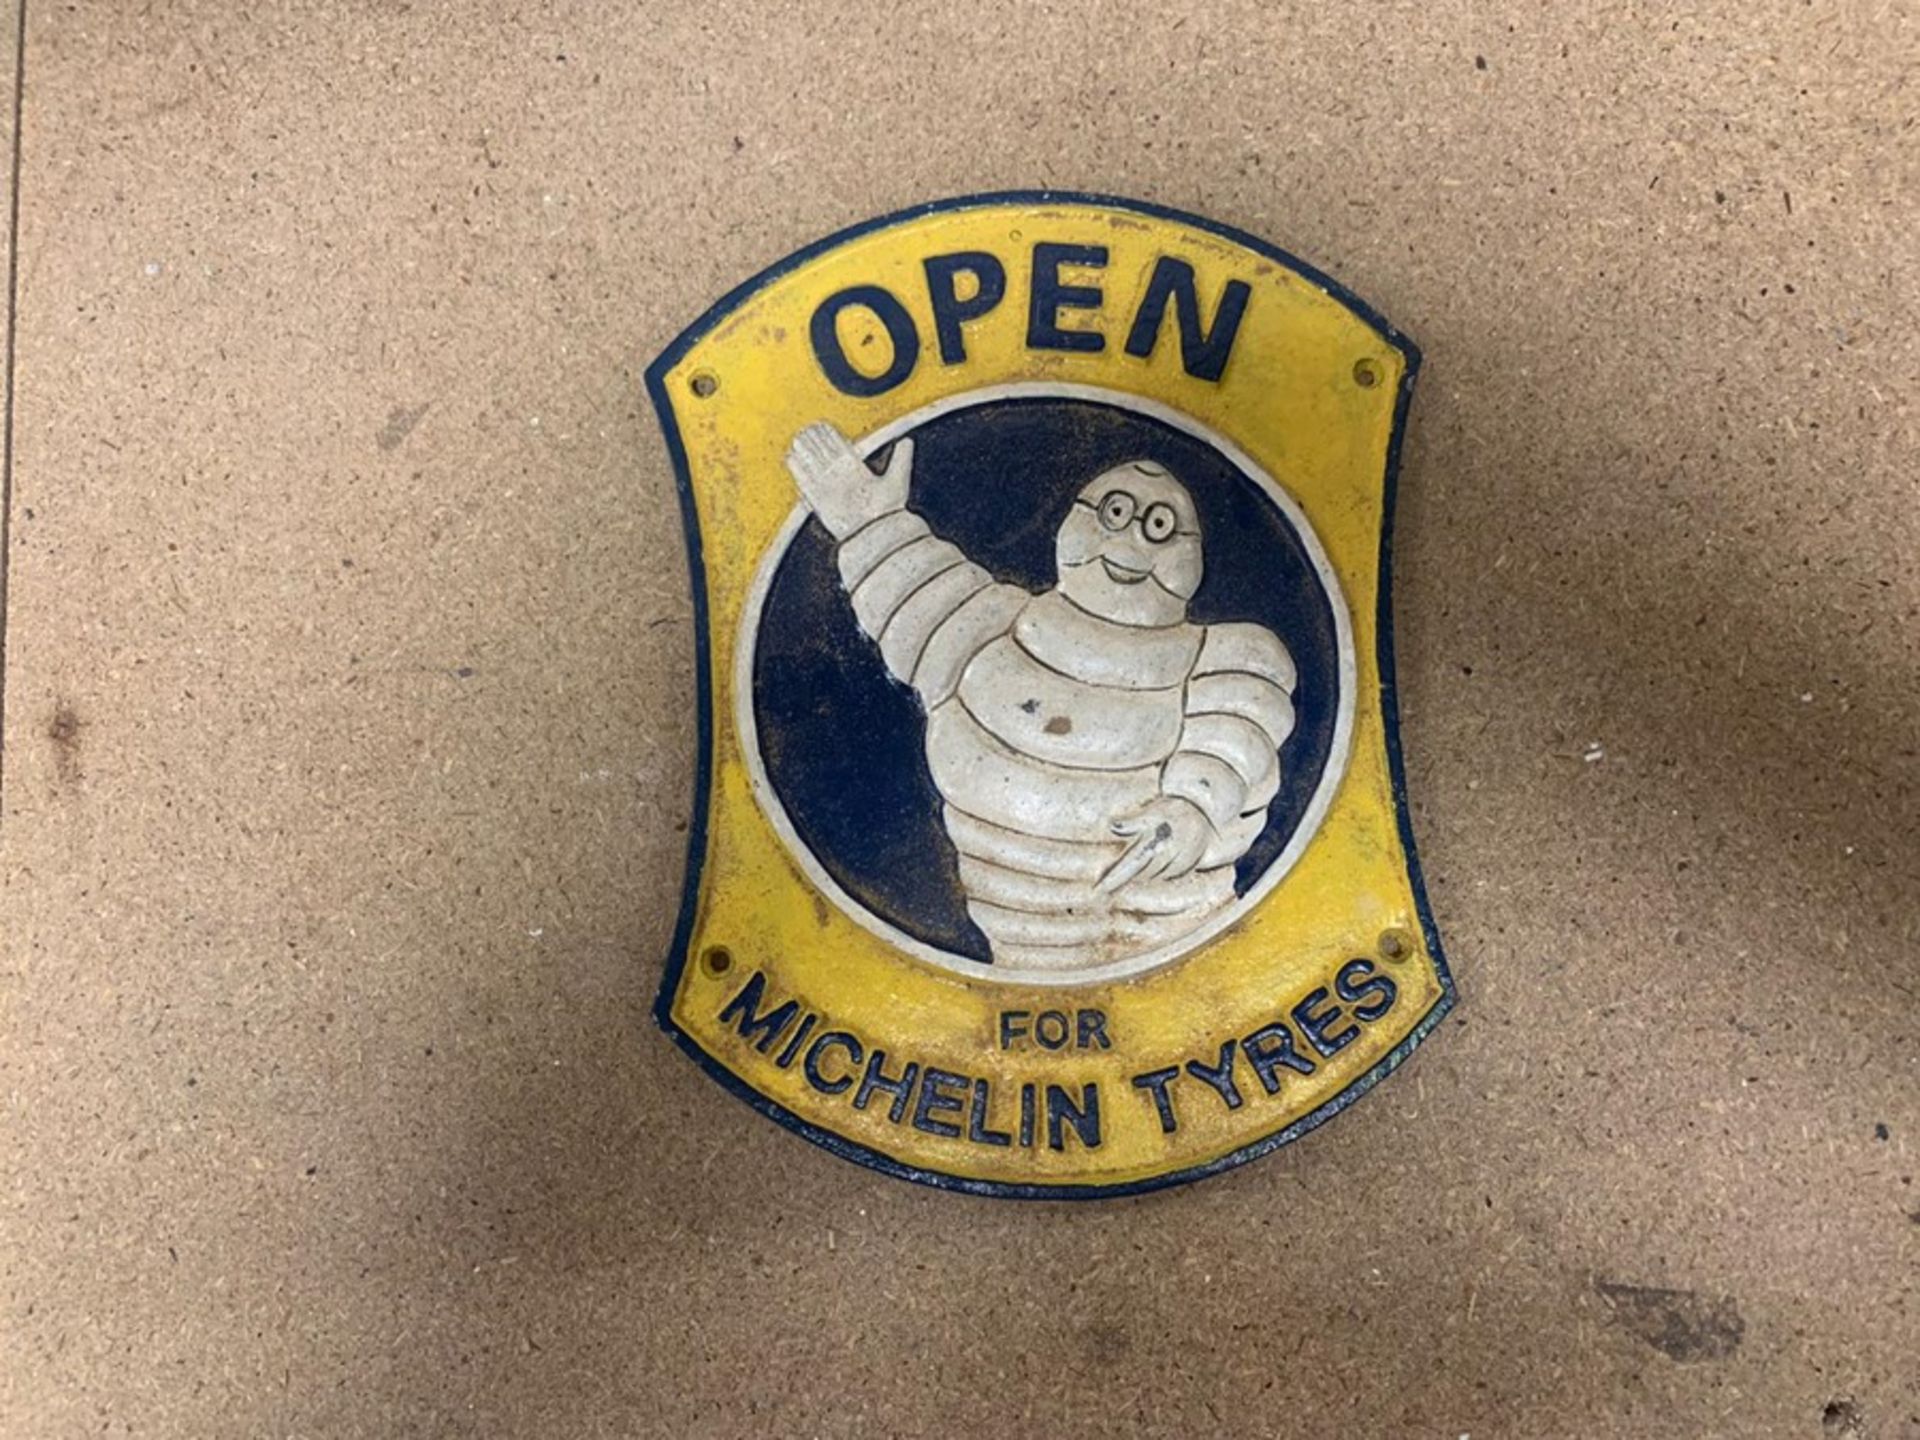 MICHELIN TYRES "OPEN" CAST IRON SIGN